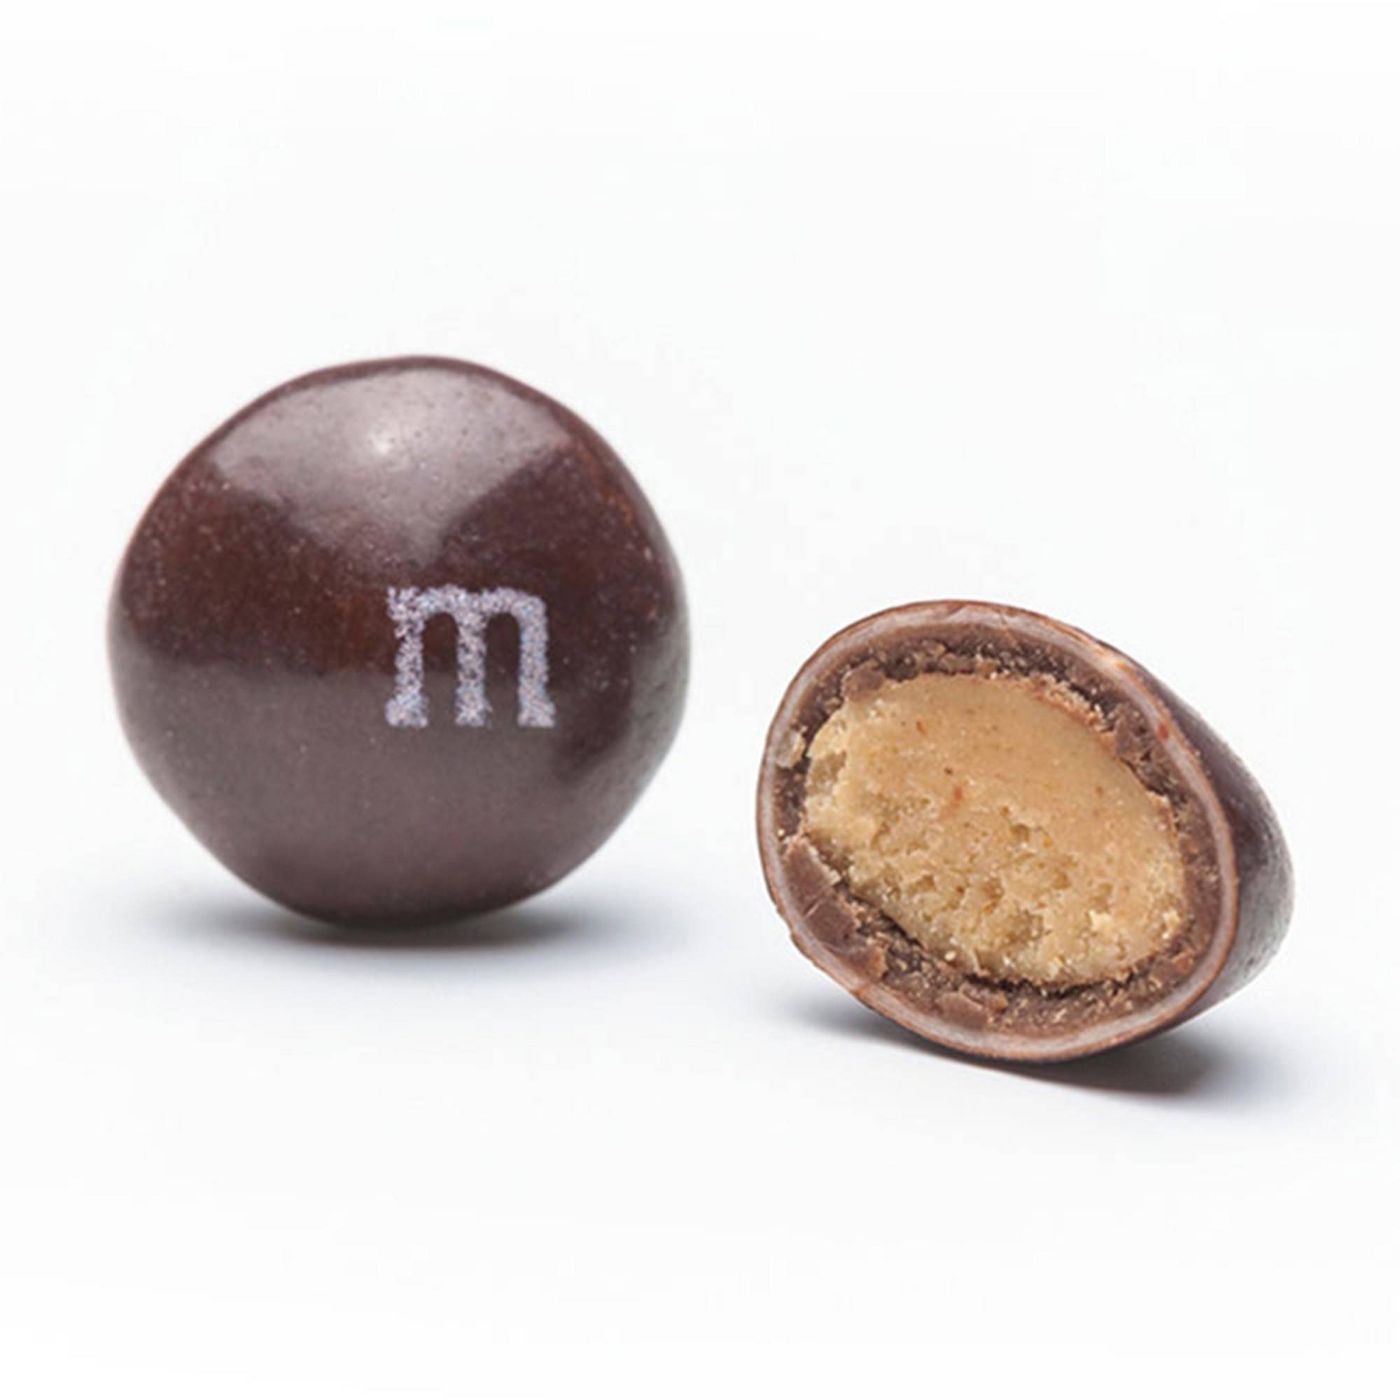 M&M'S Peanut Butter Chocolate Candy - Sharing Size - Shop Candy at